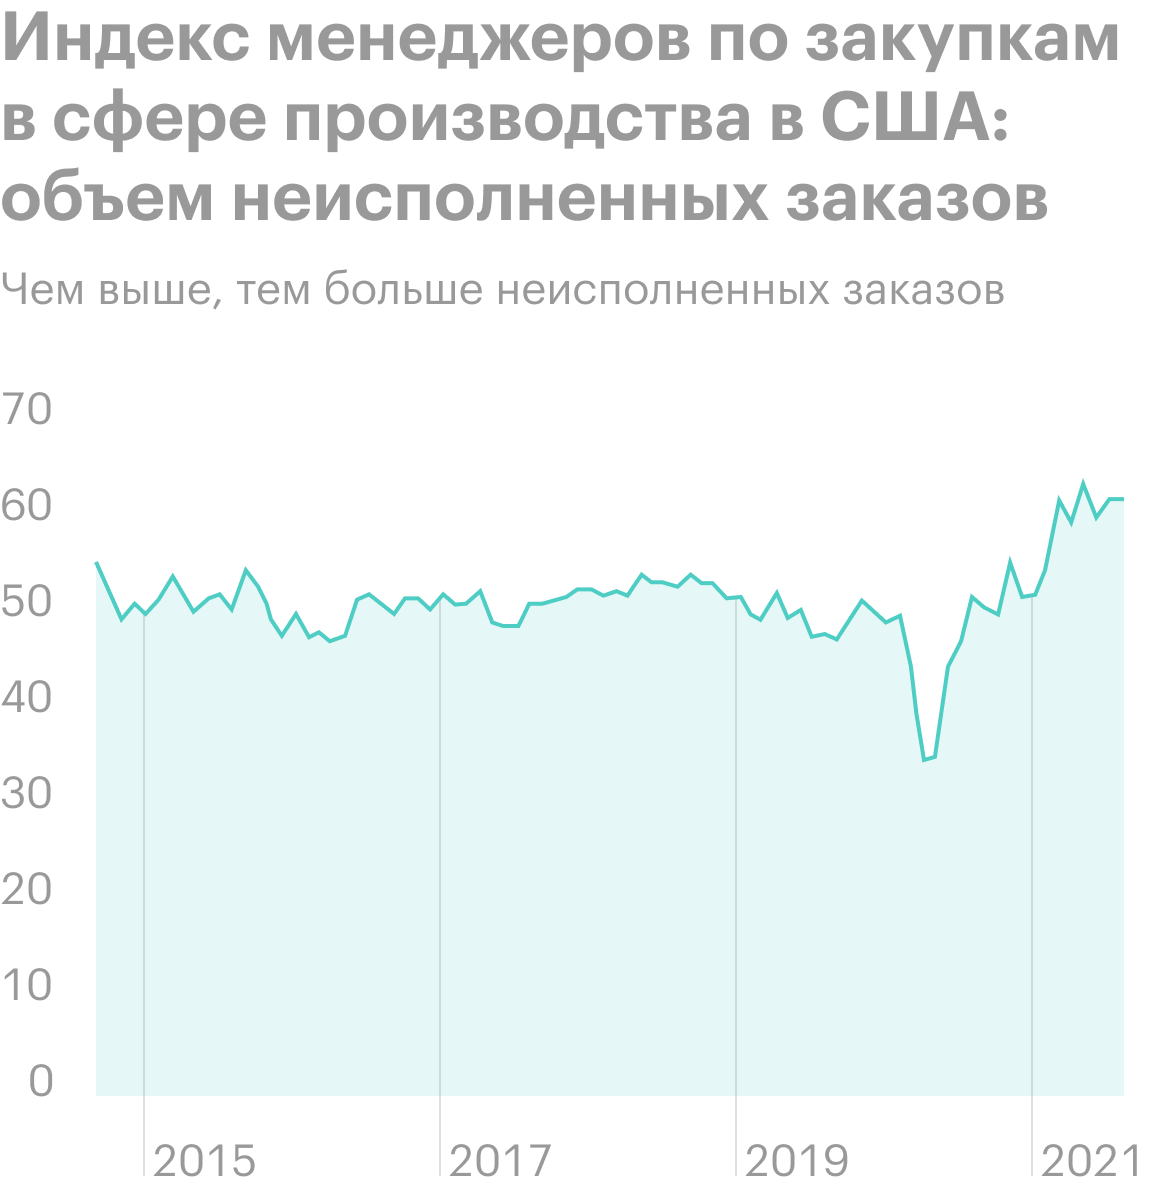 Источник: Daily Shot, Price pressures in manufacturing